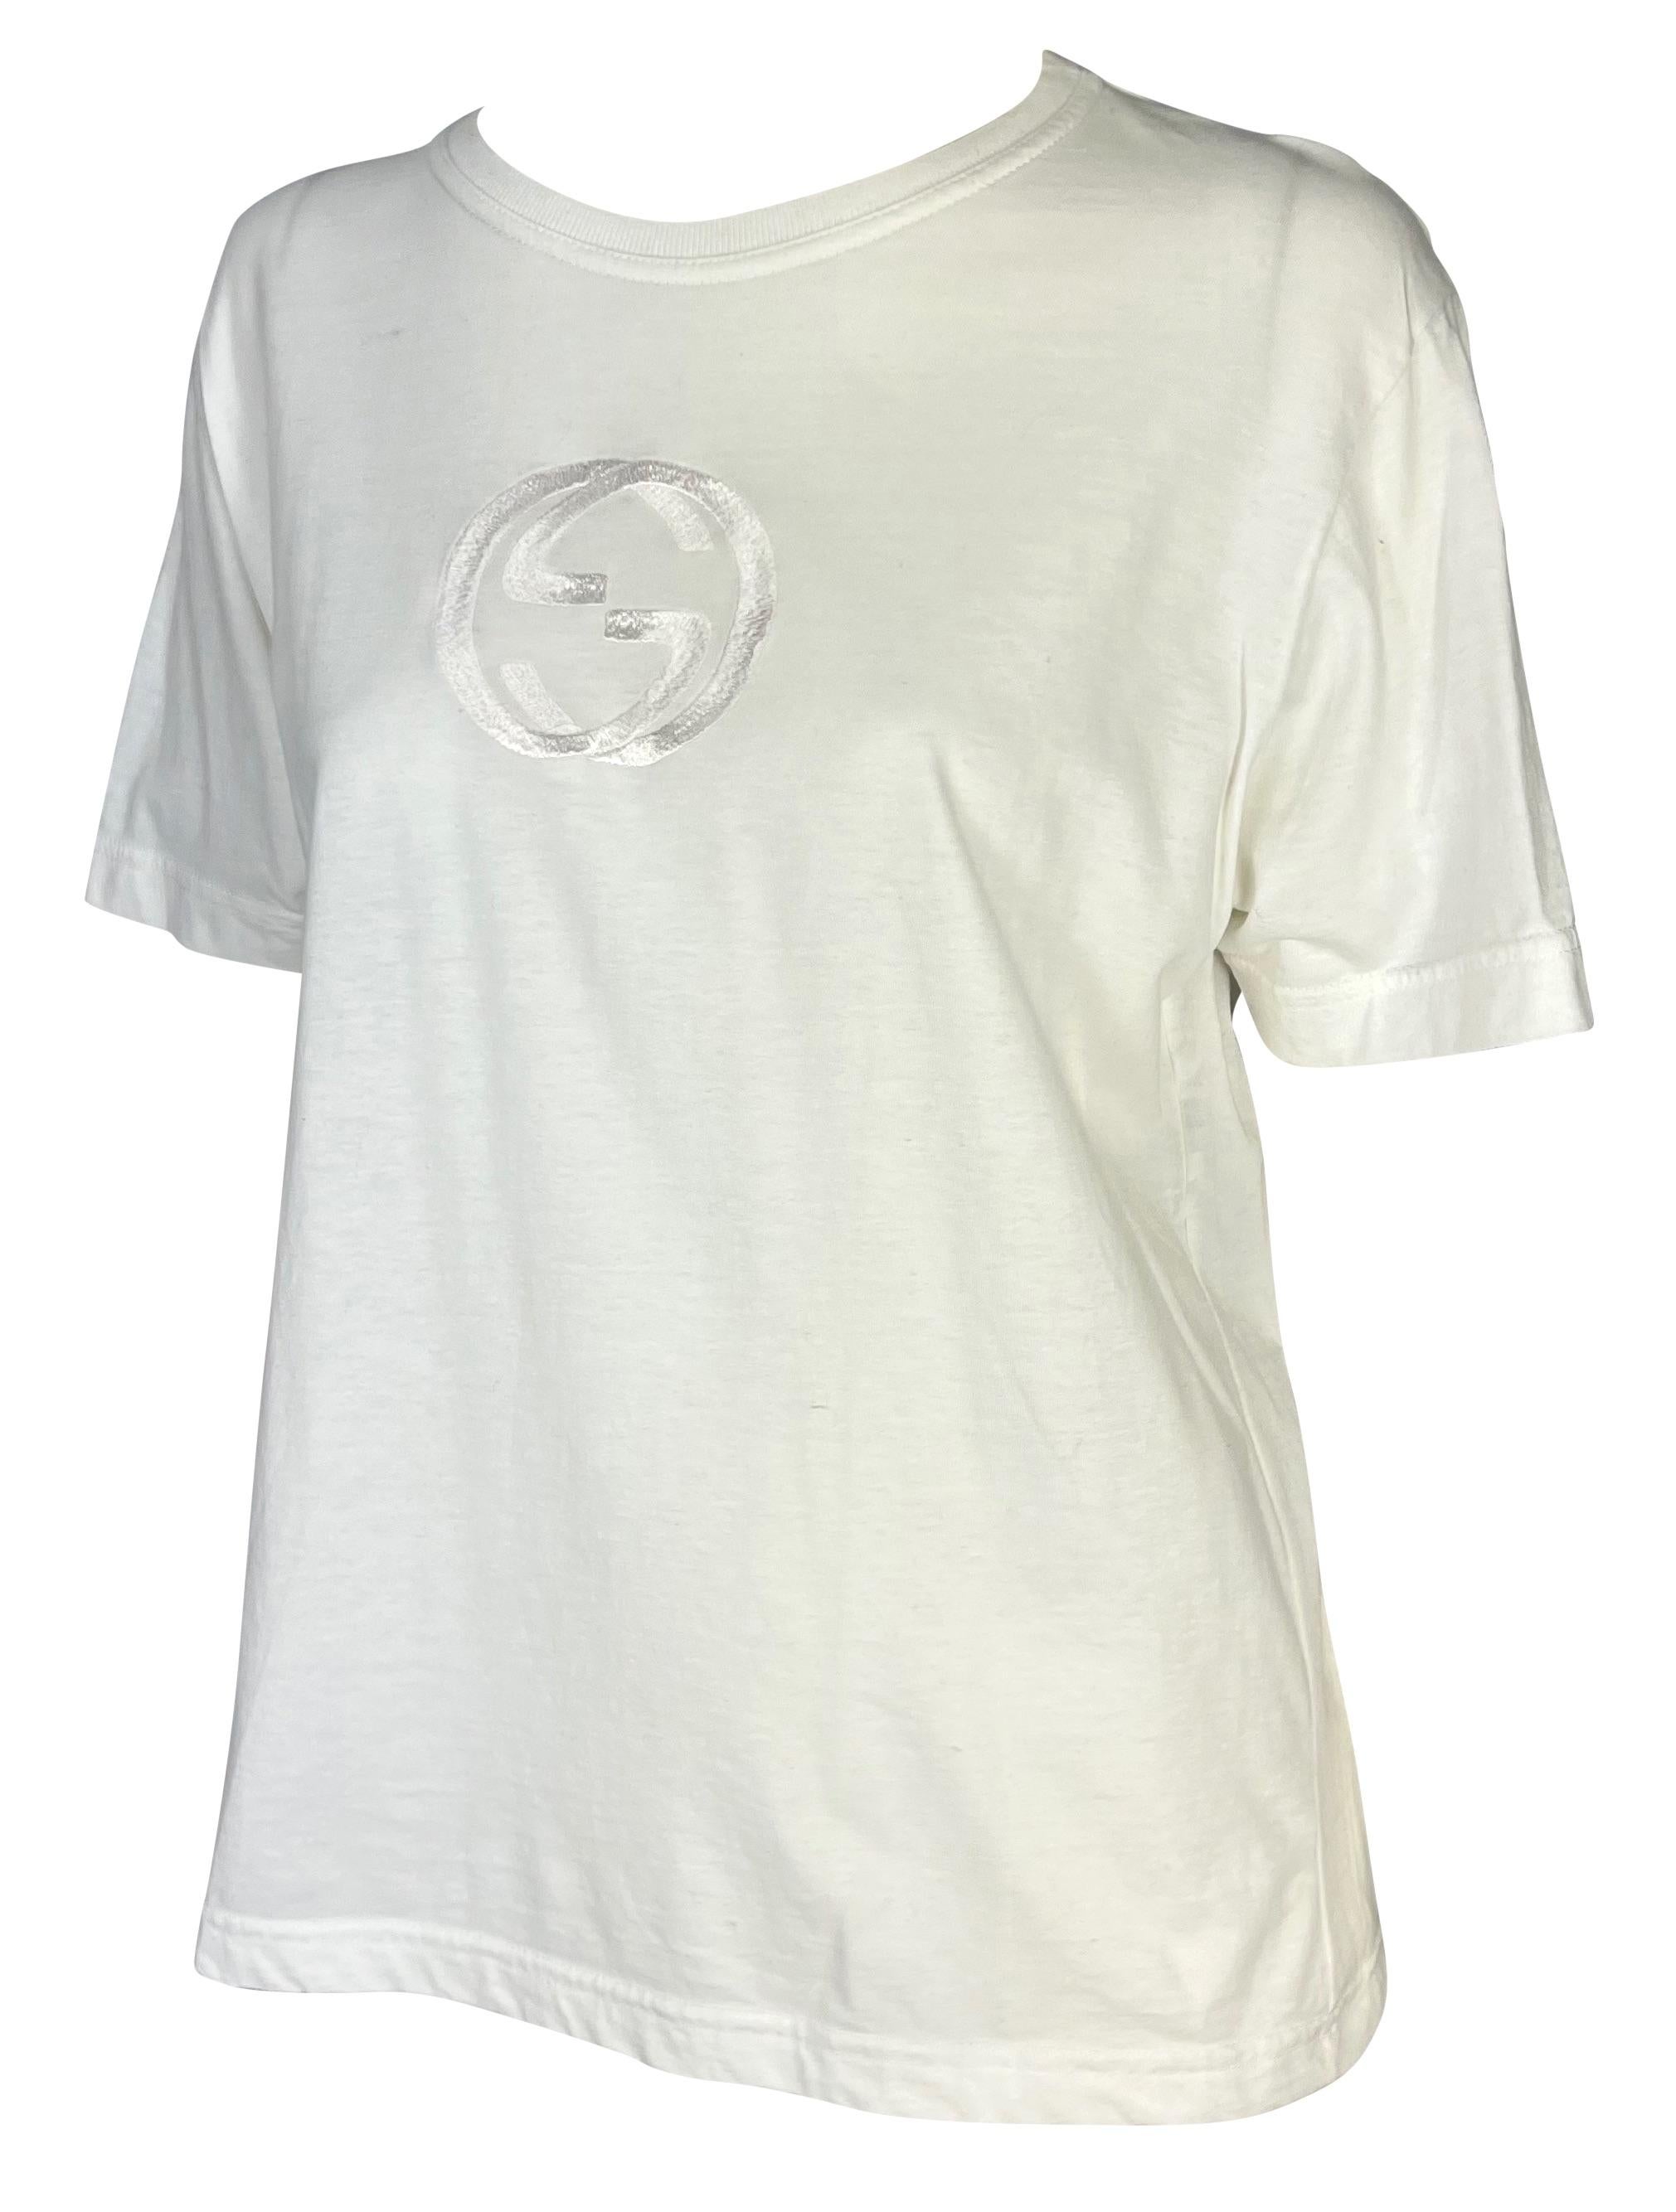 Presenting a vintage white Gucci t-shirt, designed by Tom Ford. From the Spring/Summer 1997 collection, this classic black t-shirt is elevated with a large embroidered interlocking 'GG' Gucci logo at the front. A unisex piece, this is a must have